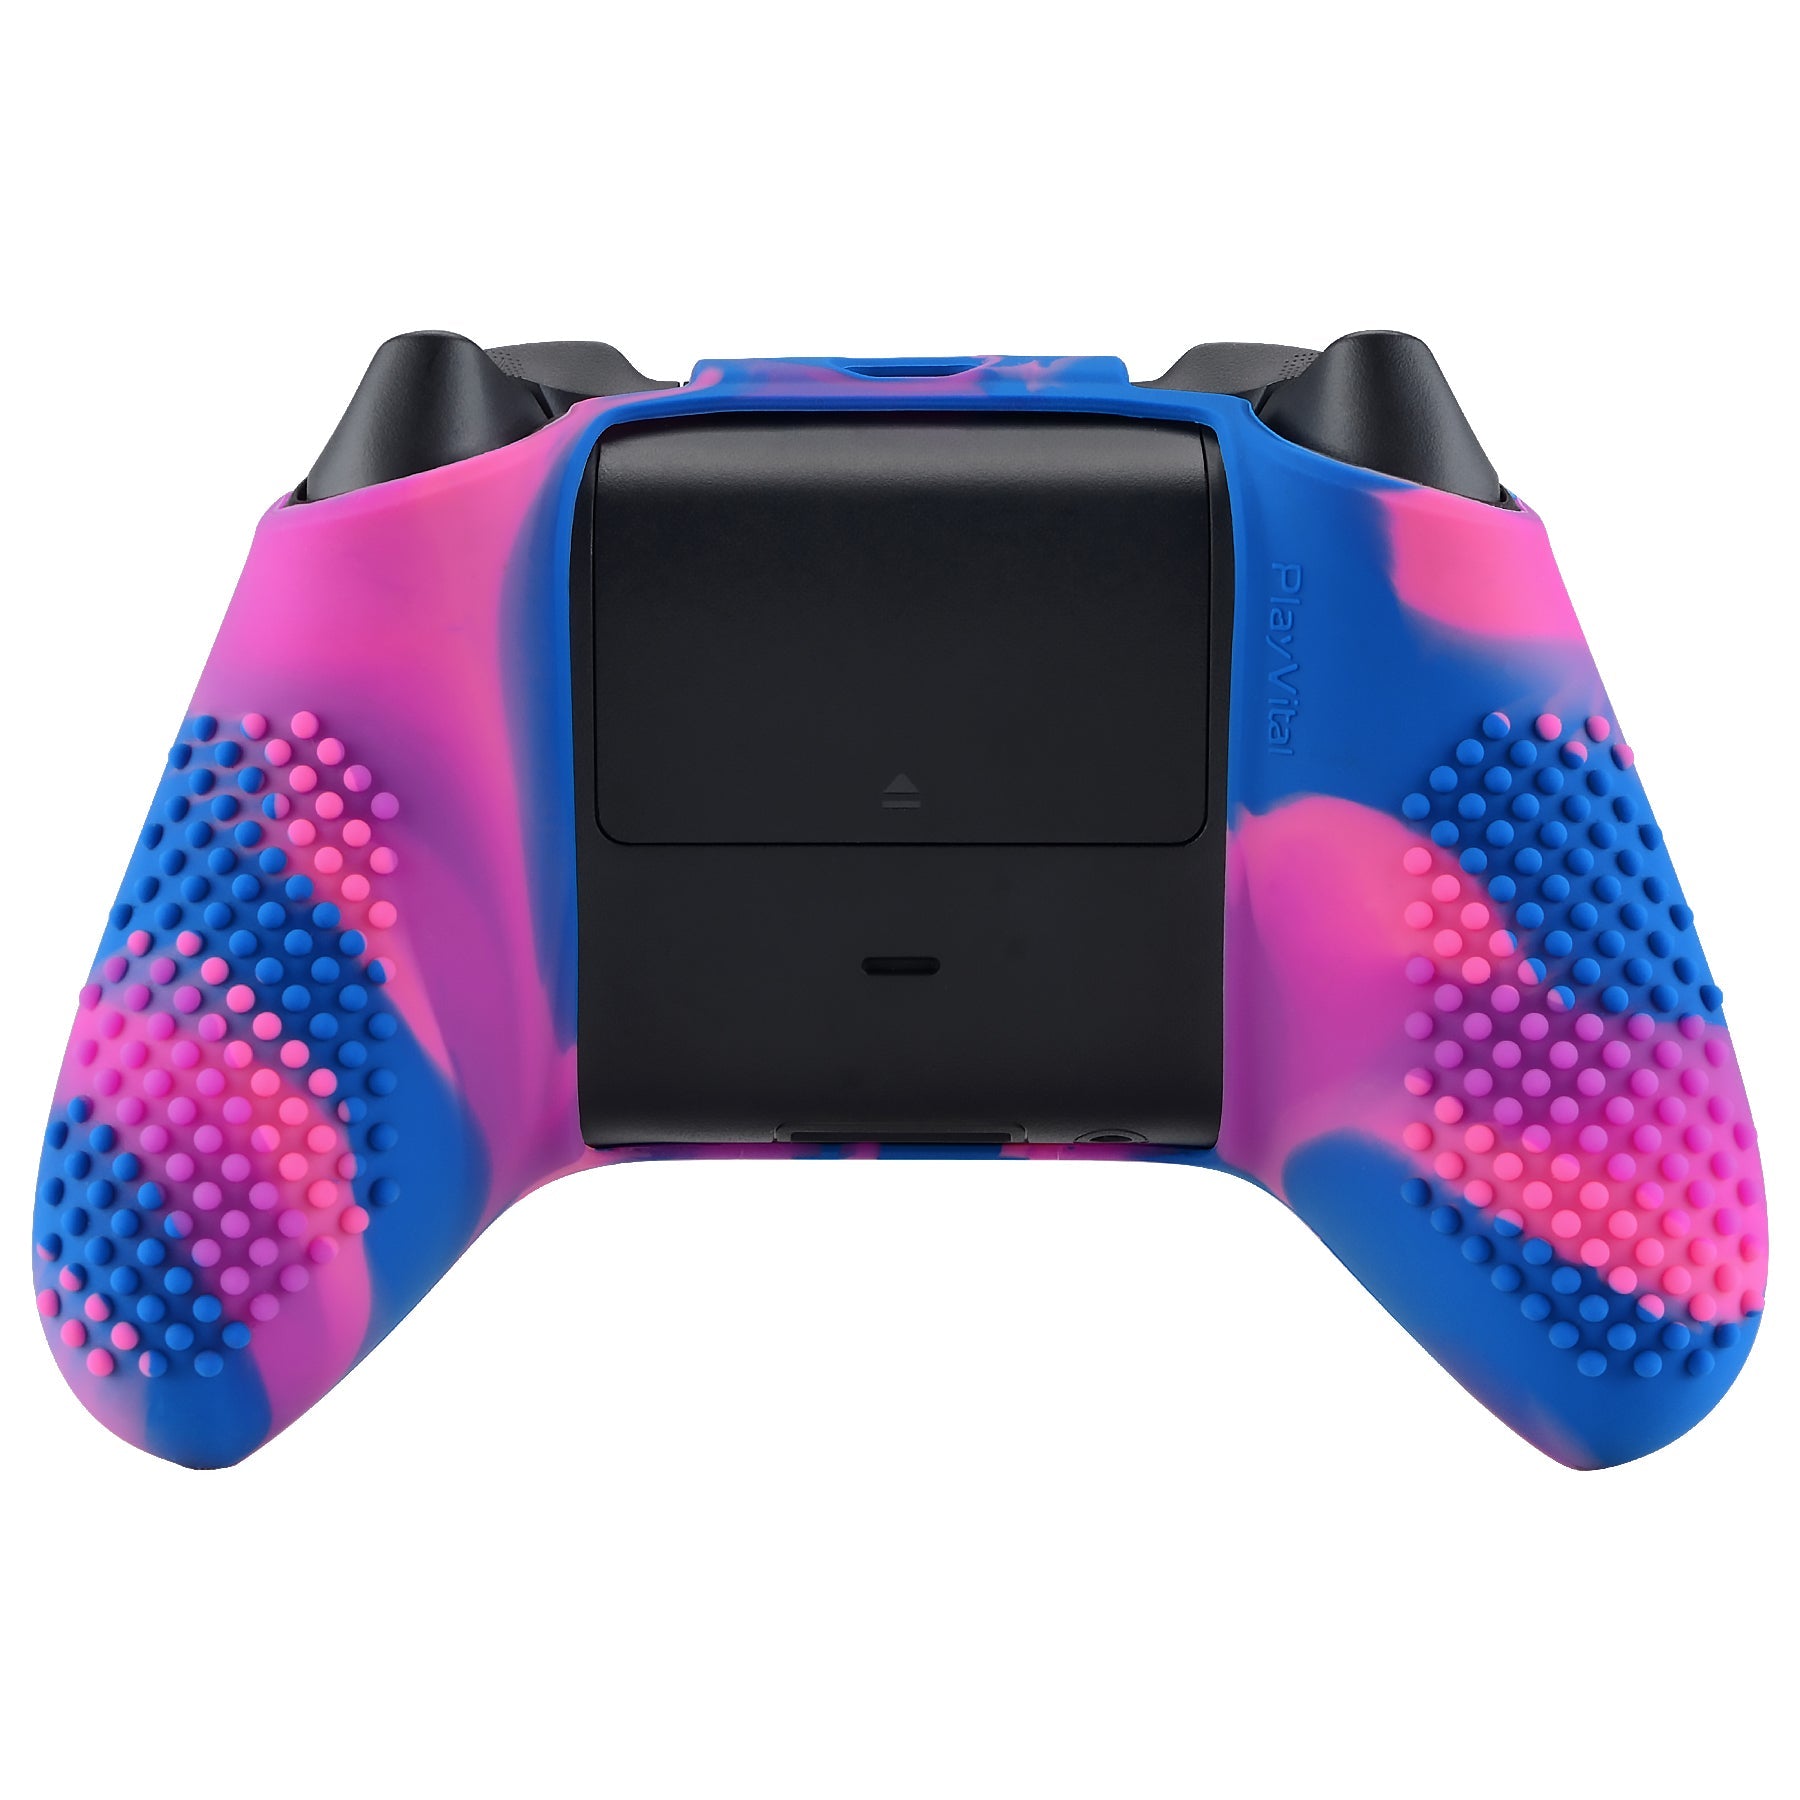 PlayVital Pink & Purple & Blue 3D Studded Edition Anti-slip Silicone Cover Skin for Xbox Series X Controller, Soft Rubber Case Protector for Xbox Series S Controller with 6 Black Thumb Grip Caps - SDX3015 PlayVital